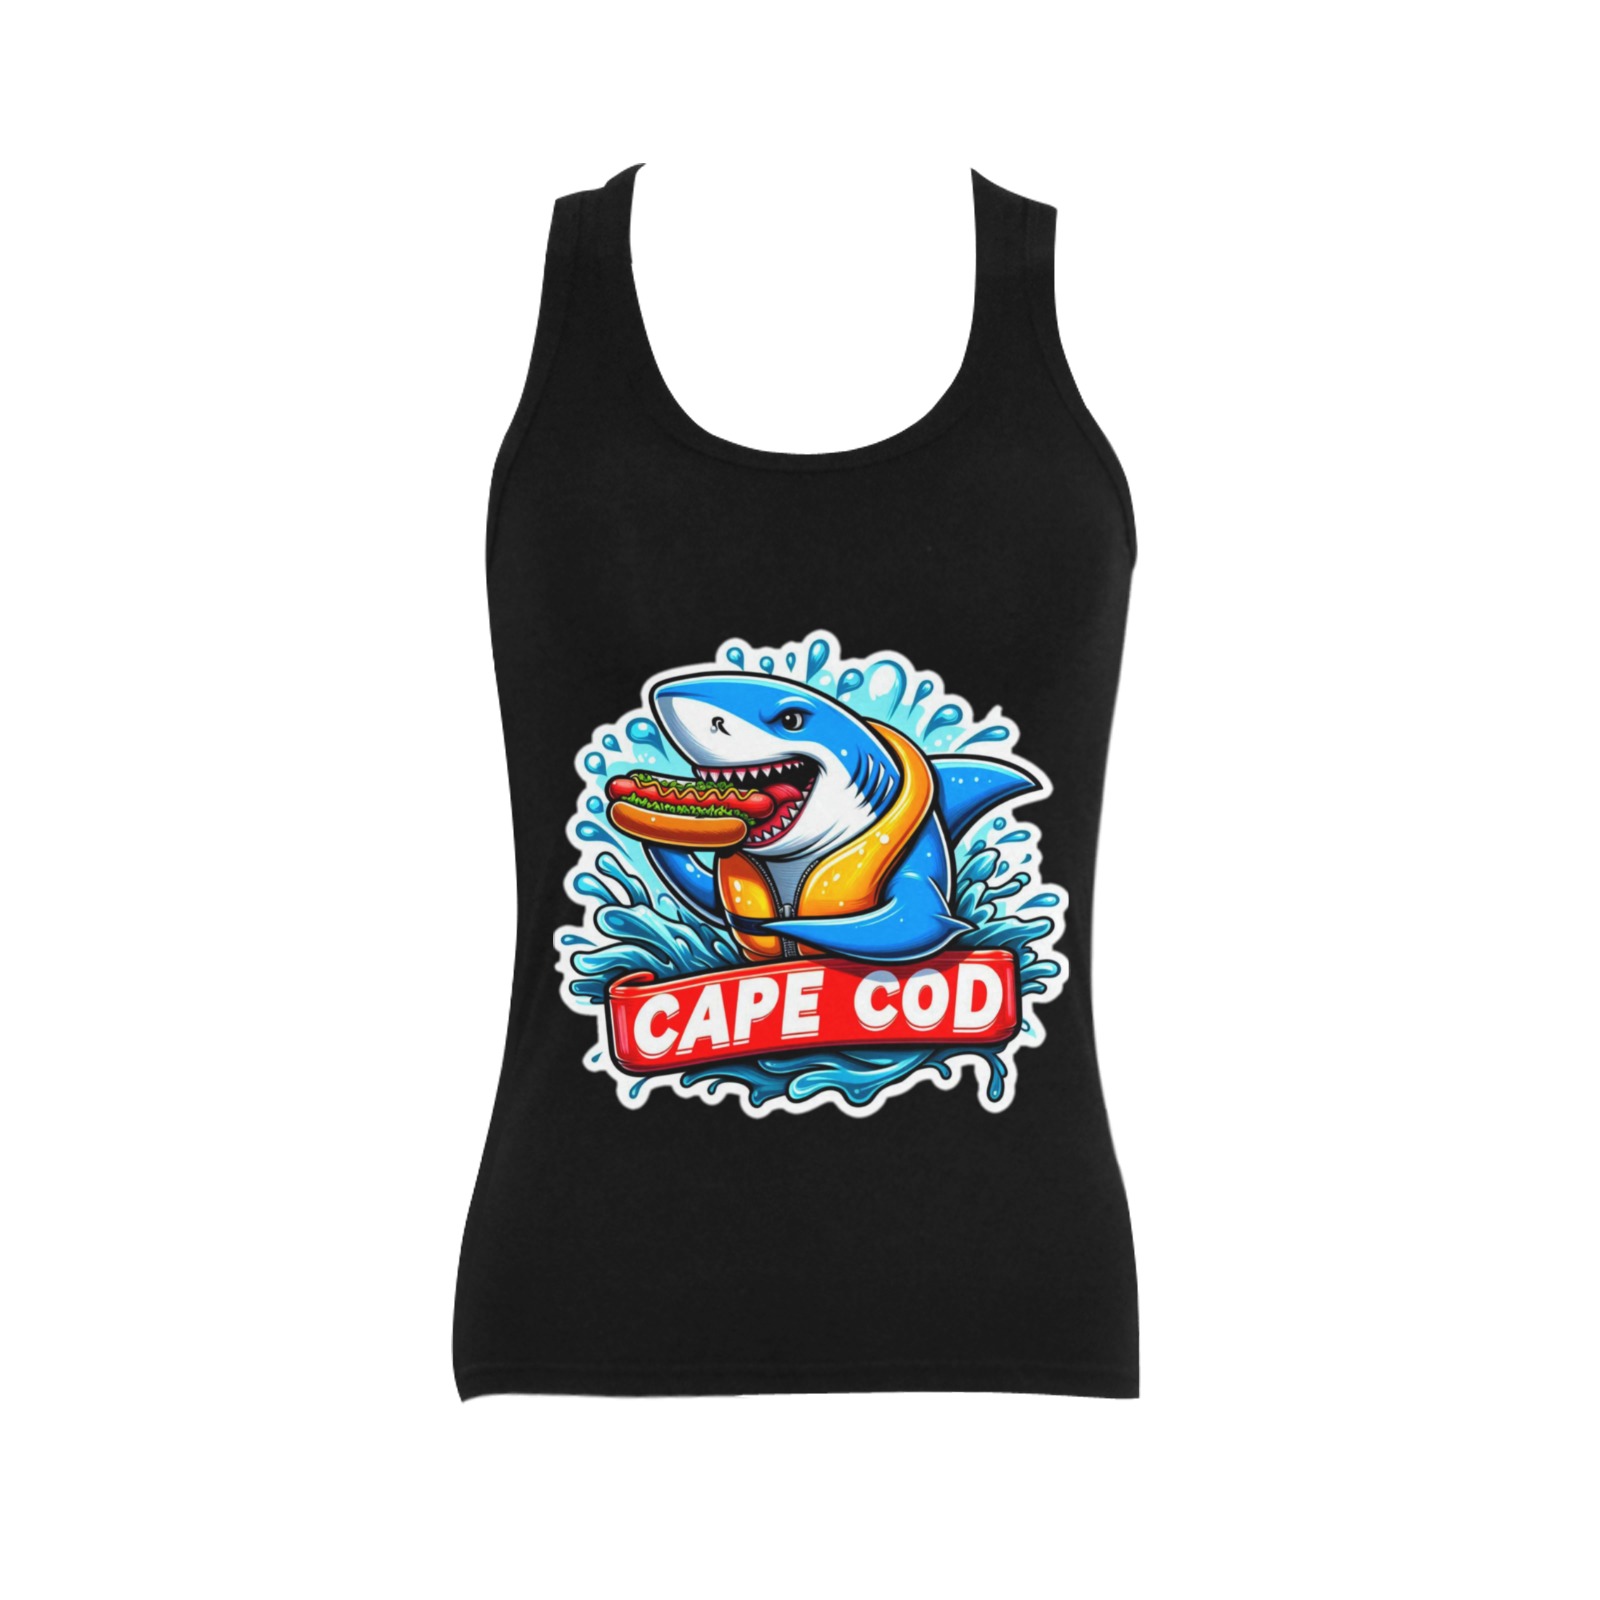 CAPE COD-GREAT WHITE EATING HOT DOG 3 Women's Shoulder-Free Tank Top (Model T35)